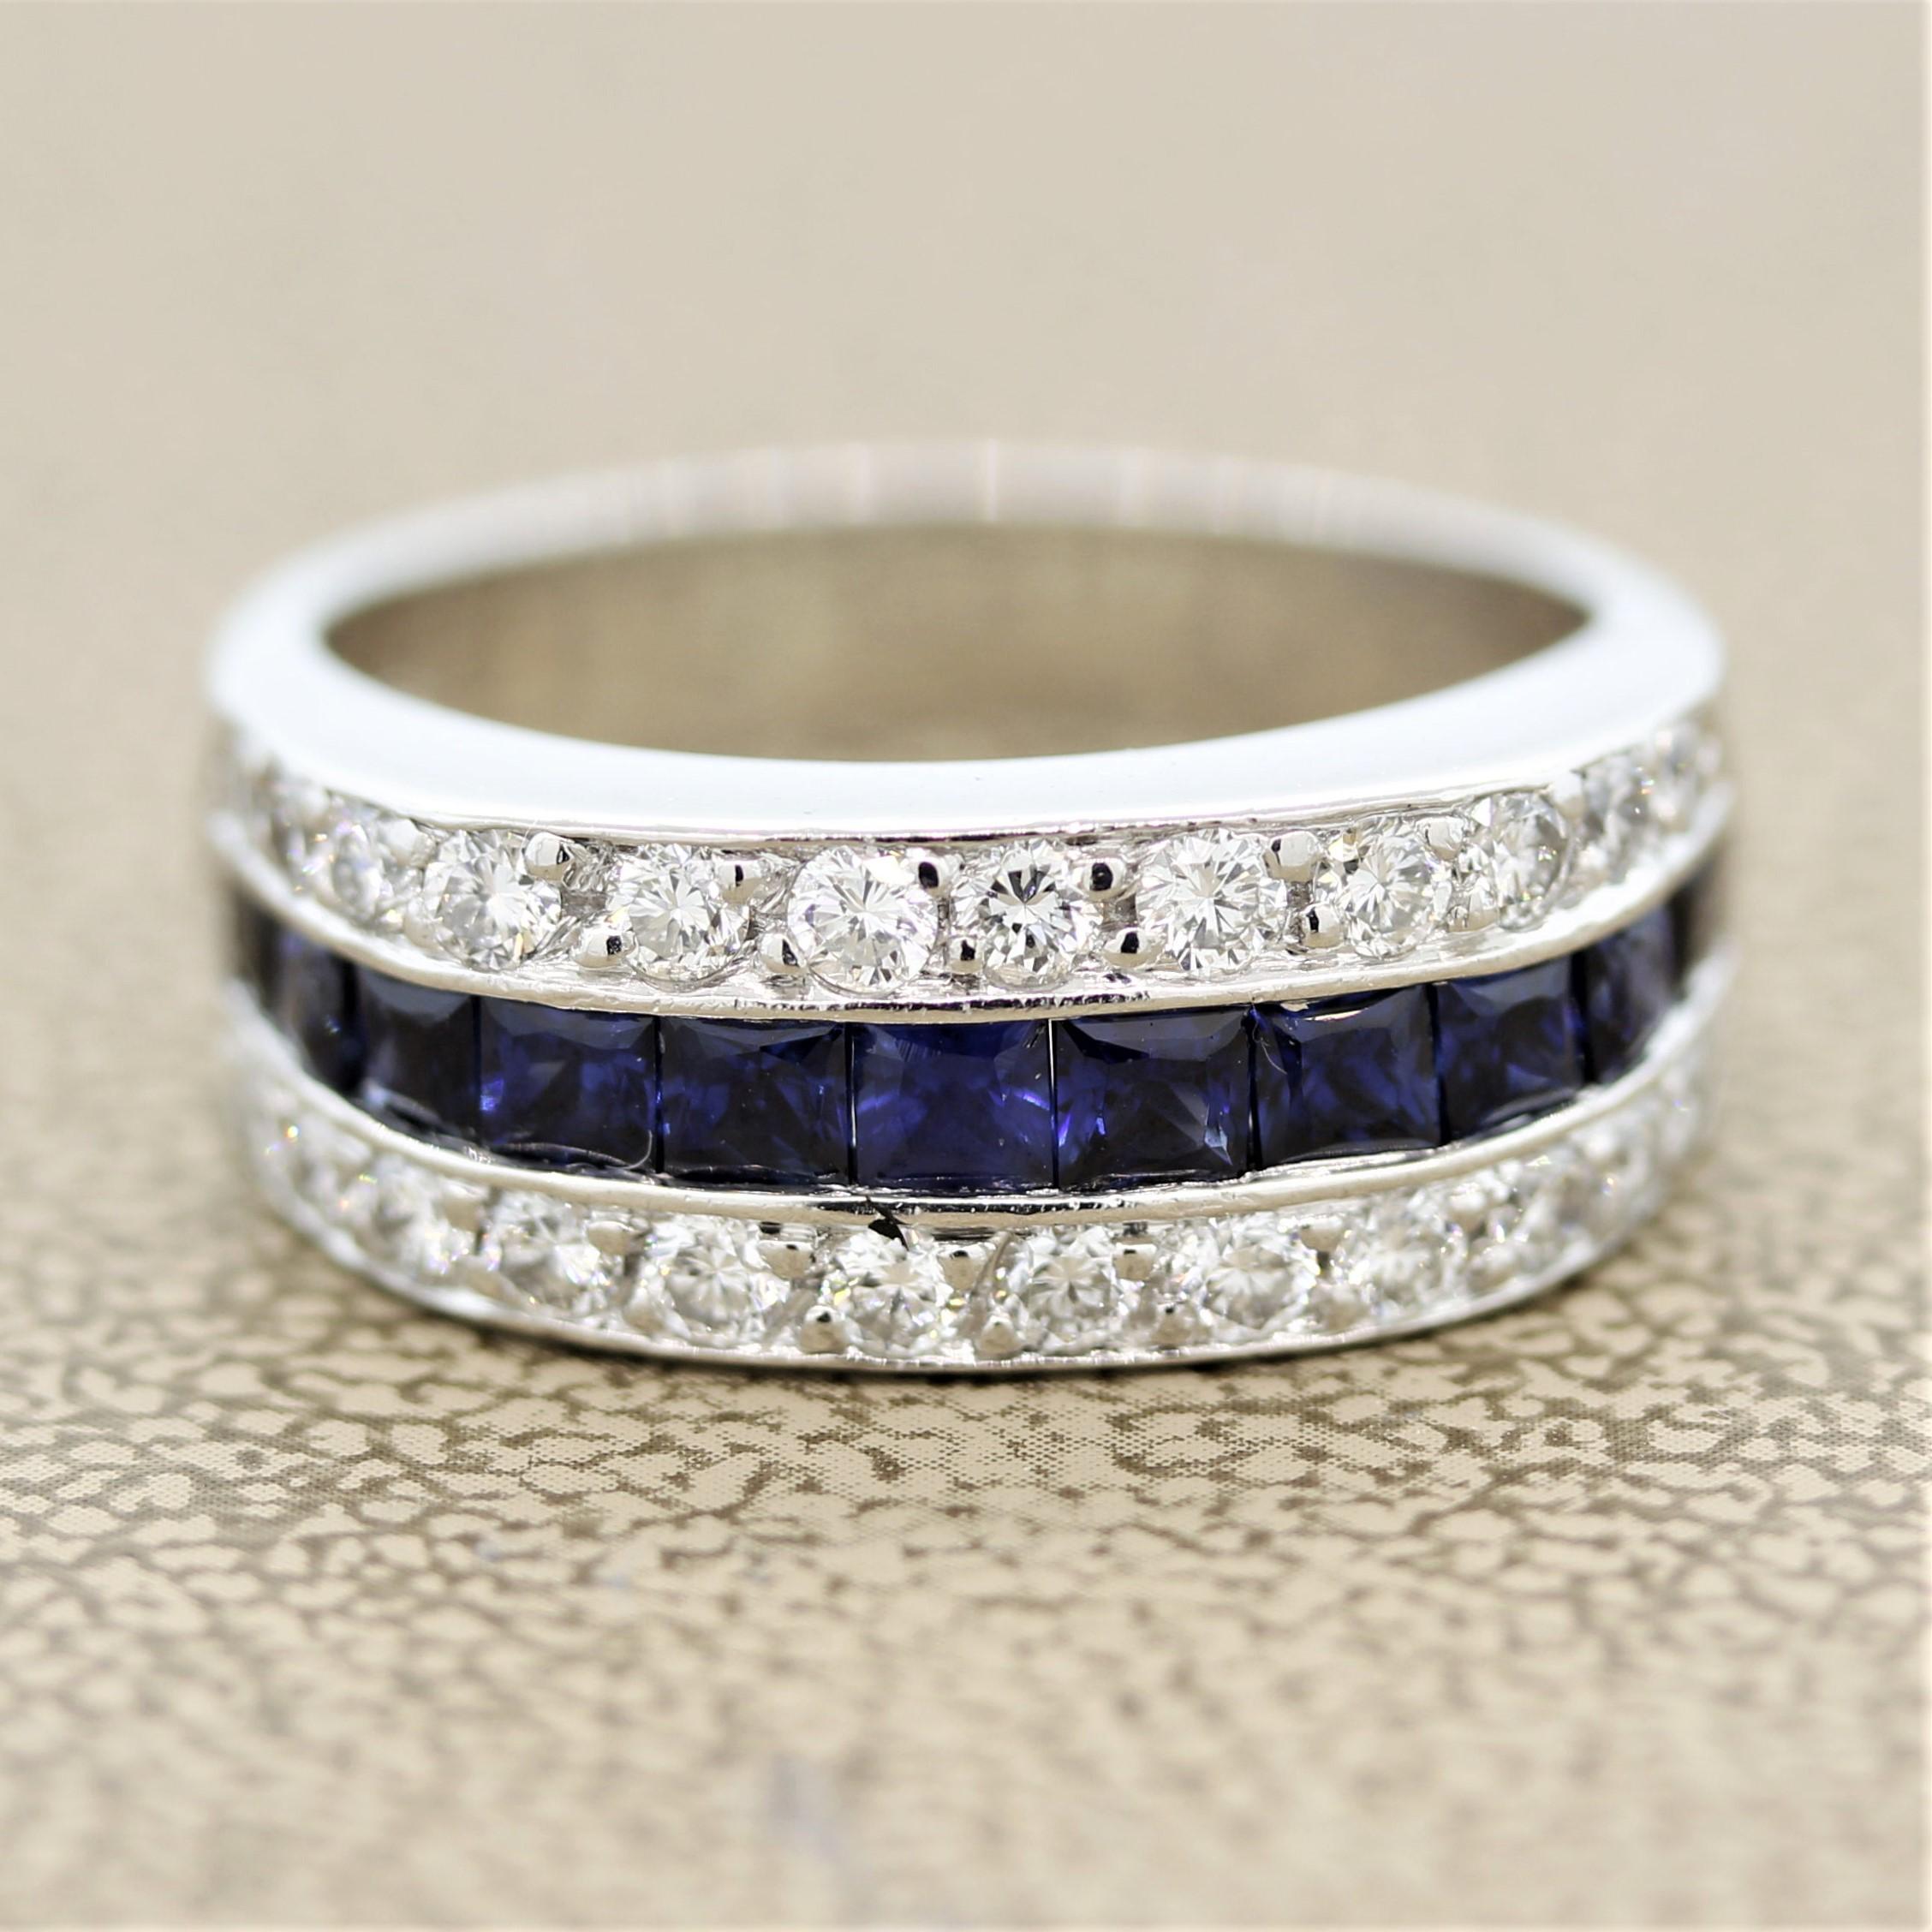 An excellently made ring featuring 0.50 carats of round brilliant cut diamonds. Additionally there are 1.00 carat of calibre-cut blue sapphires that are channel set between the diamonds. Made in platinum and ready to be worn.

Ring Size 6.5